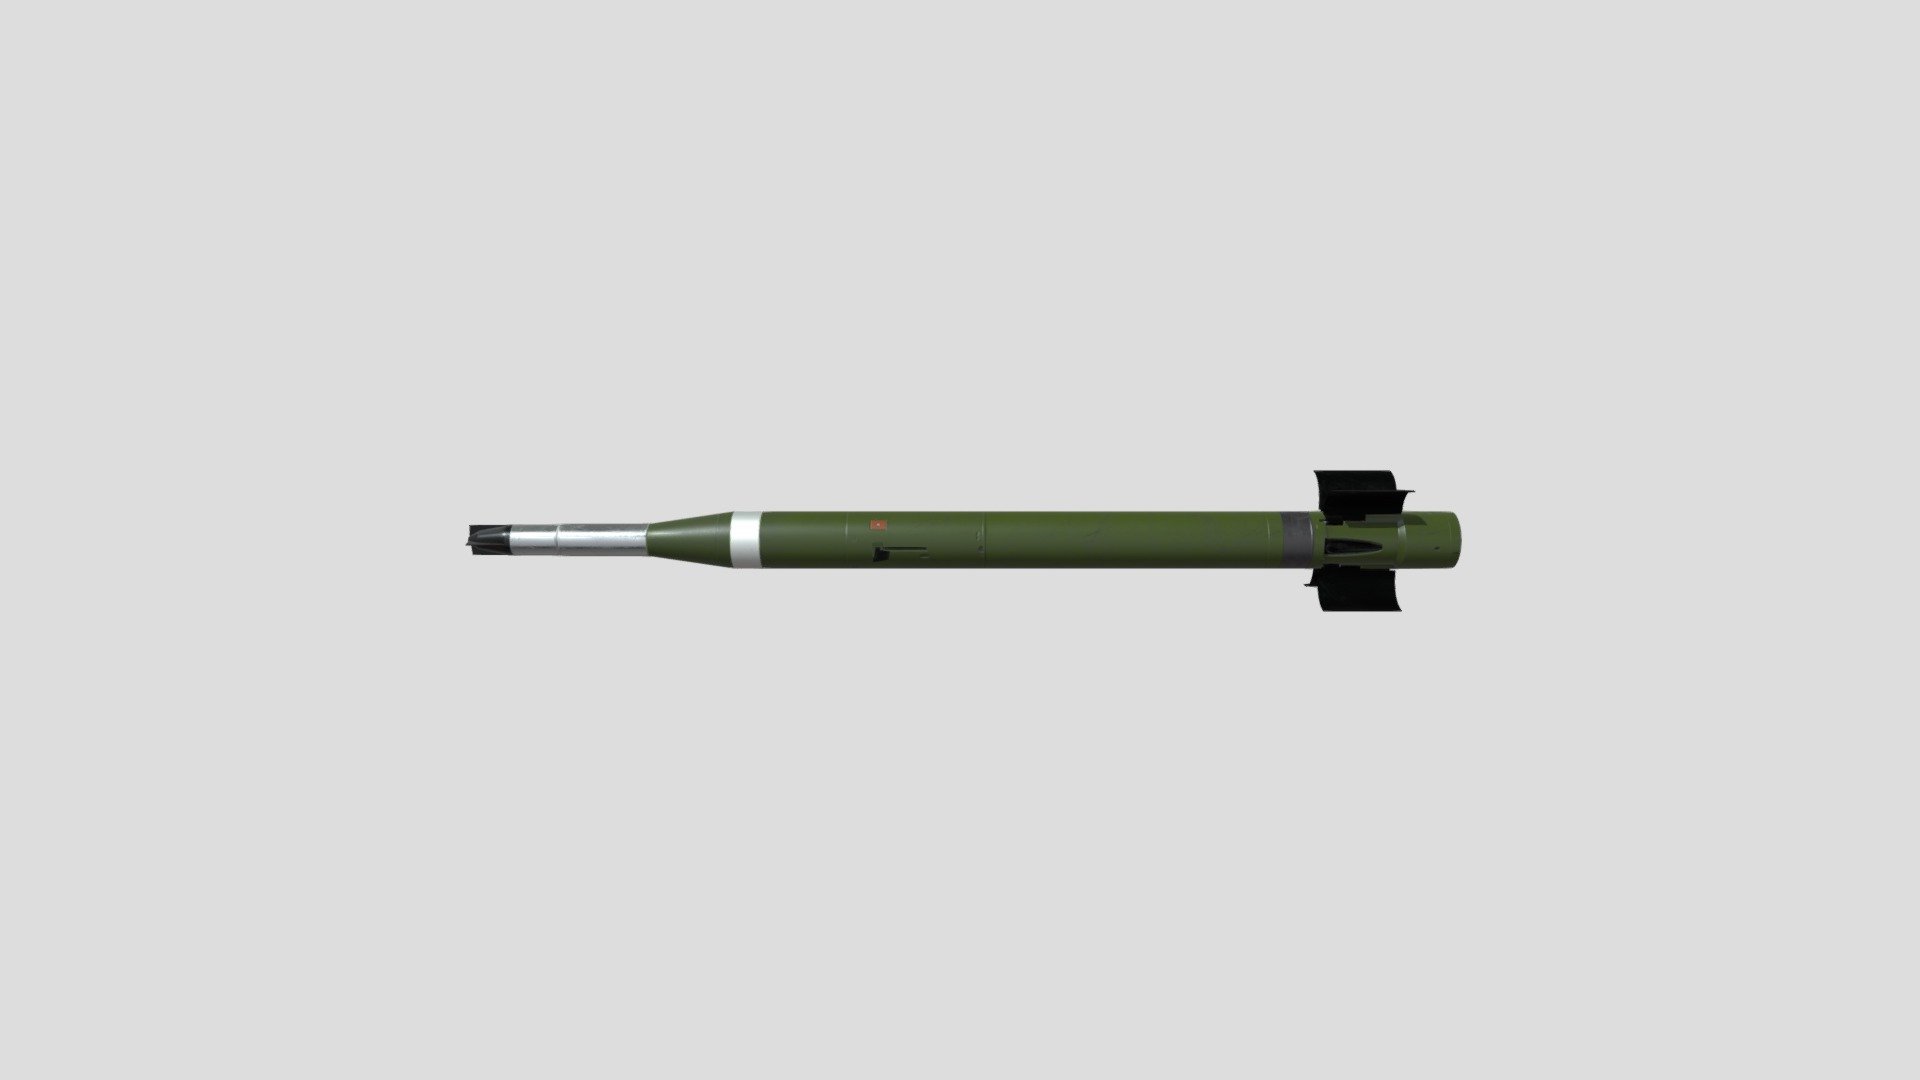 Anti-tank missile with a shaped charge that burns through armor - Anti-tank missile - 3D model by bvad81 3d model